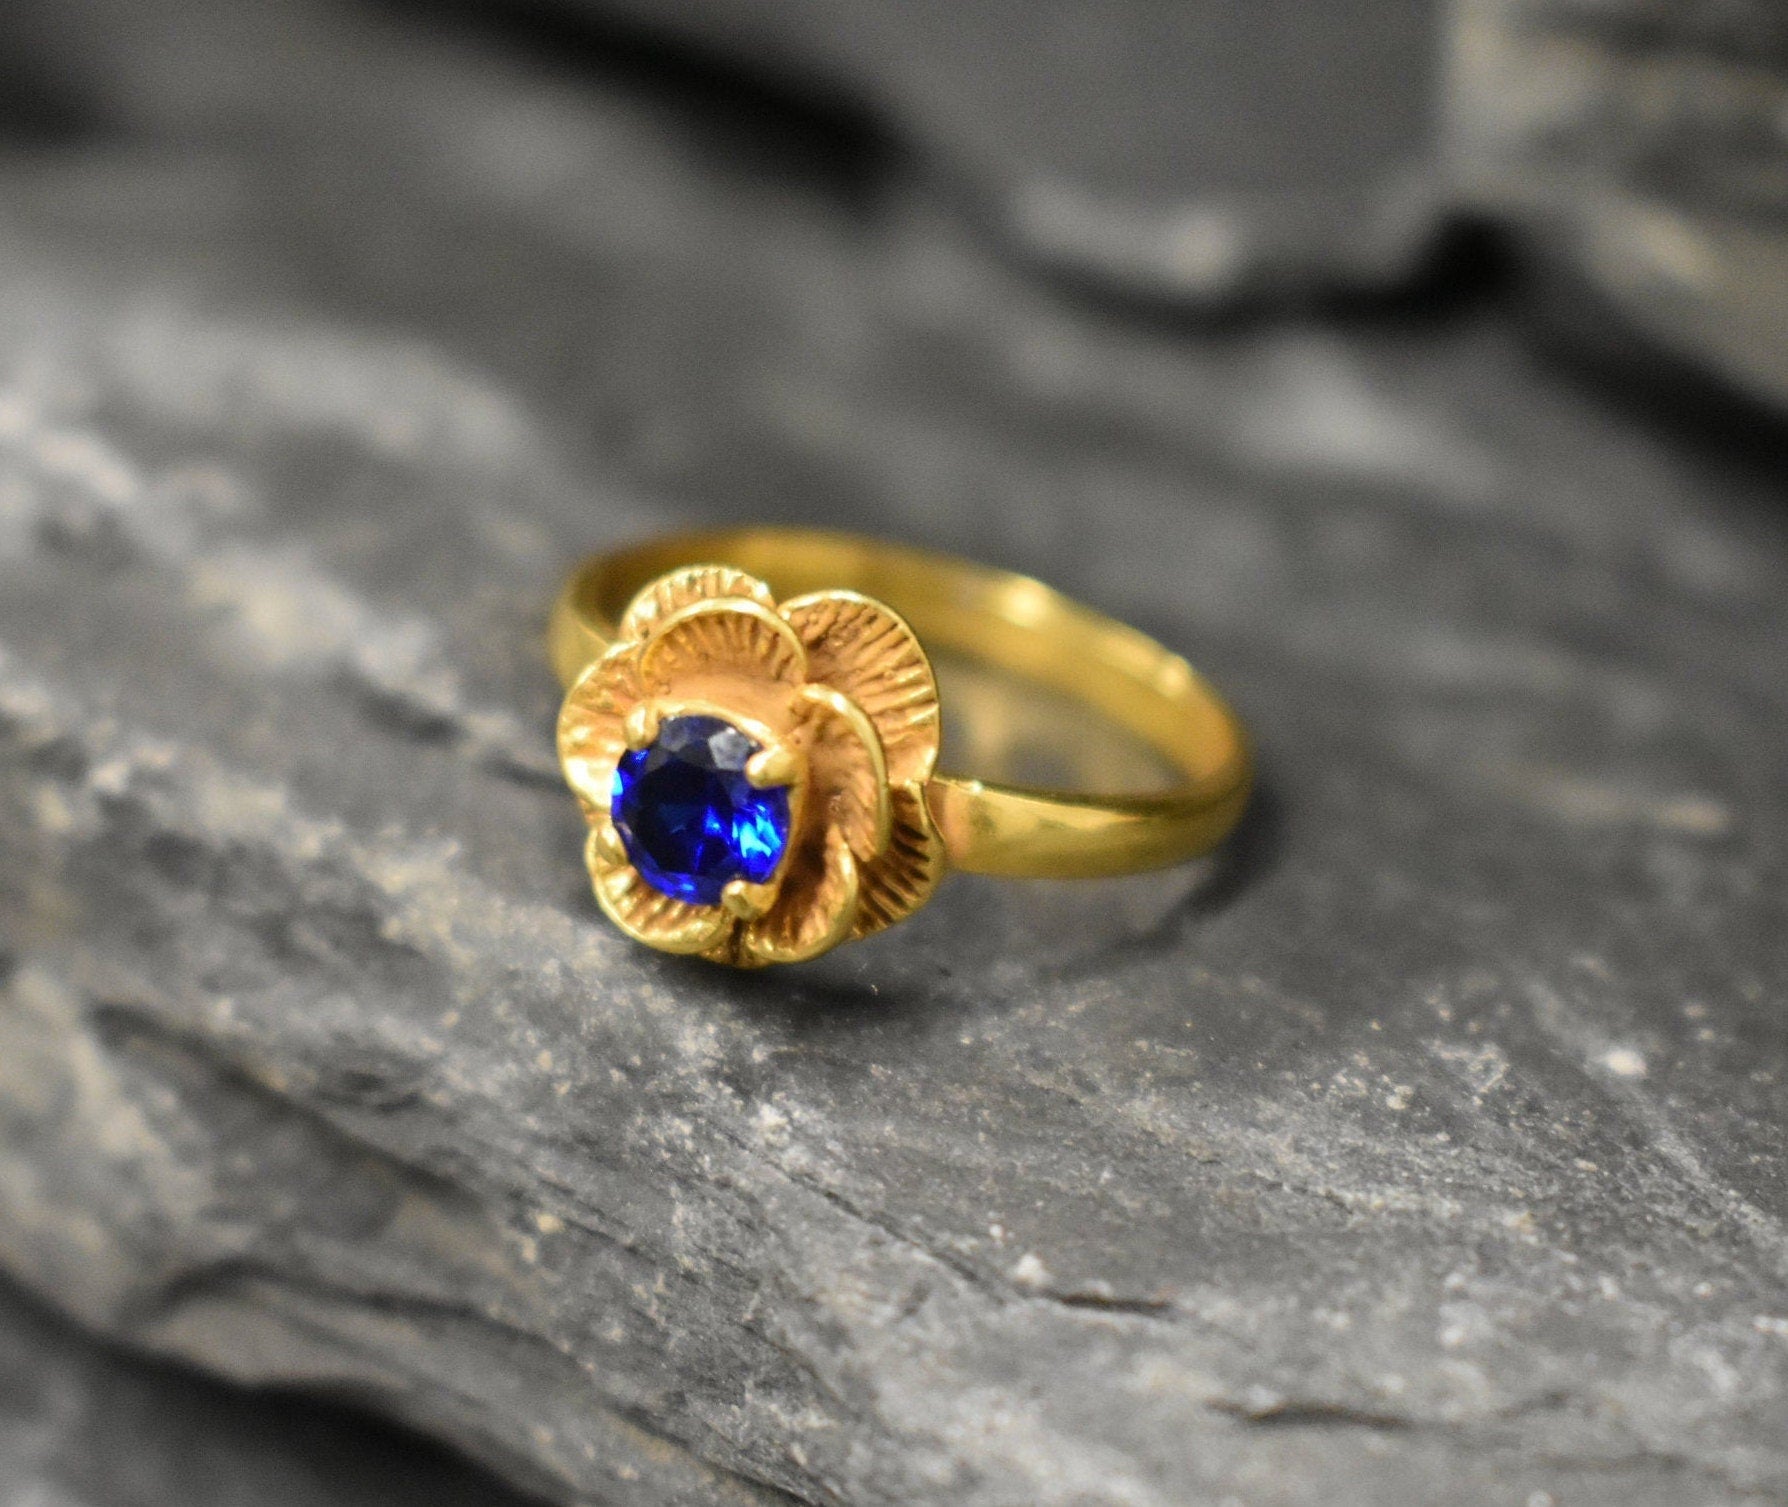 Sapphire Ring, Gold Sapphire Ring, Created Sapphire, Gold Flower Ring, Vintage Flower Ring, Blue Diamond Ring, Flower Ring, 925 Silver Ring